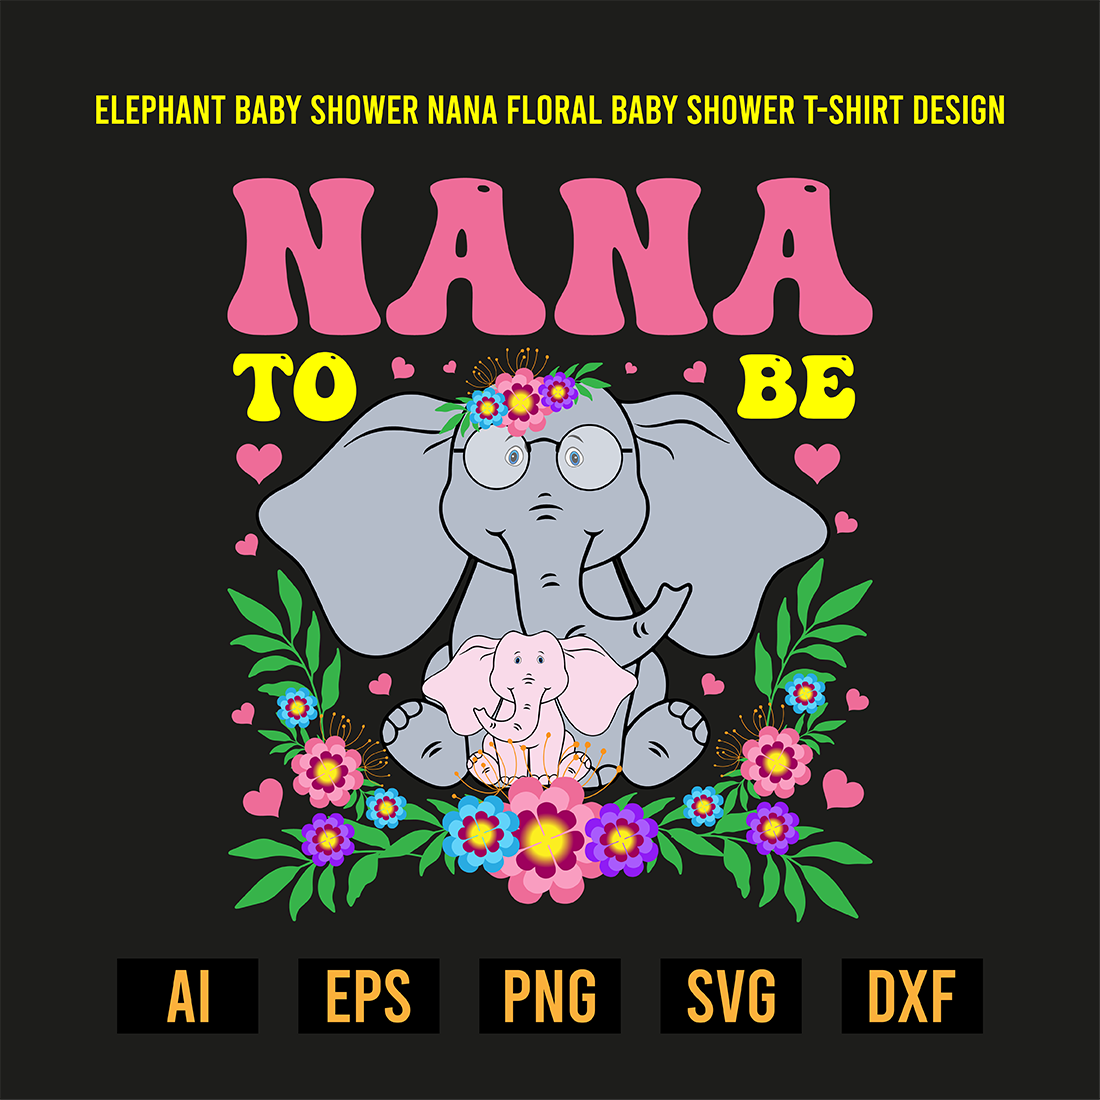 Elephant Baby Shower Nana Floral Baby Shower T-Shirt Design preview image.